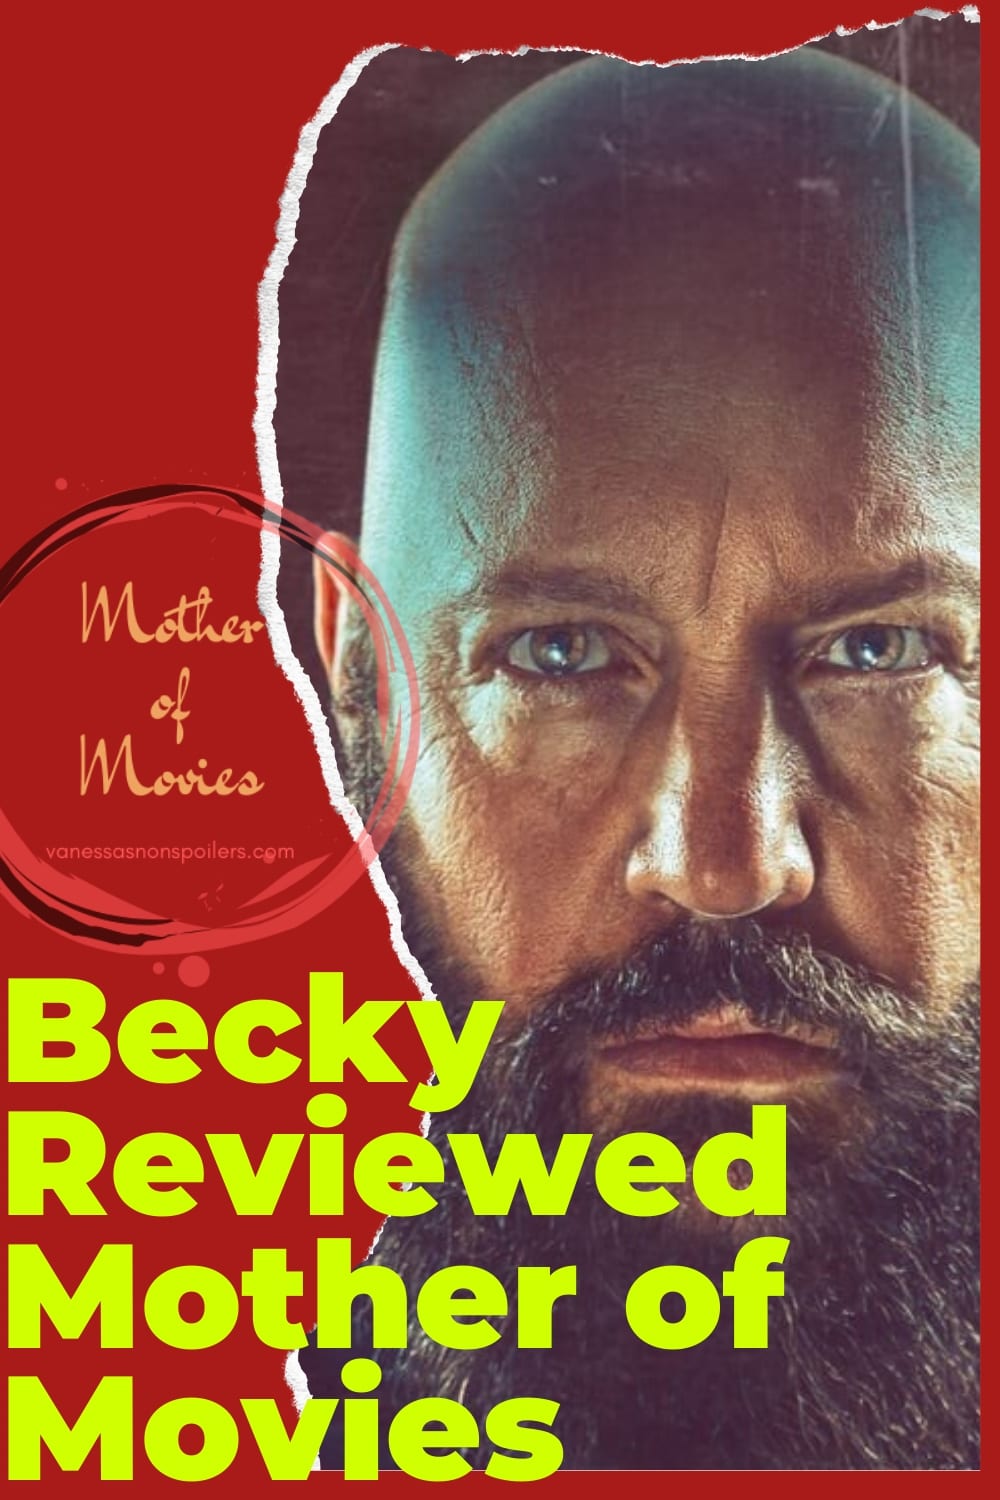 Kevin James Unrecognisable in Becky (Movie Review) - Mother of Movies